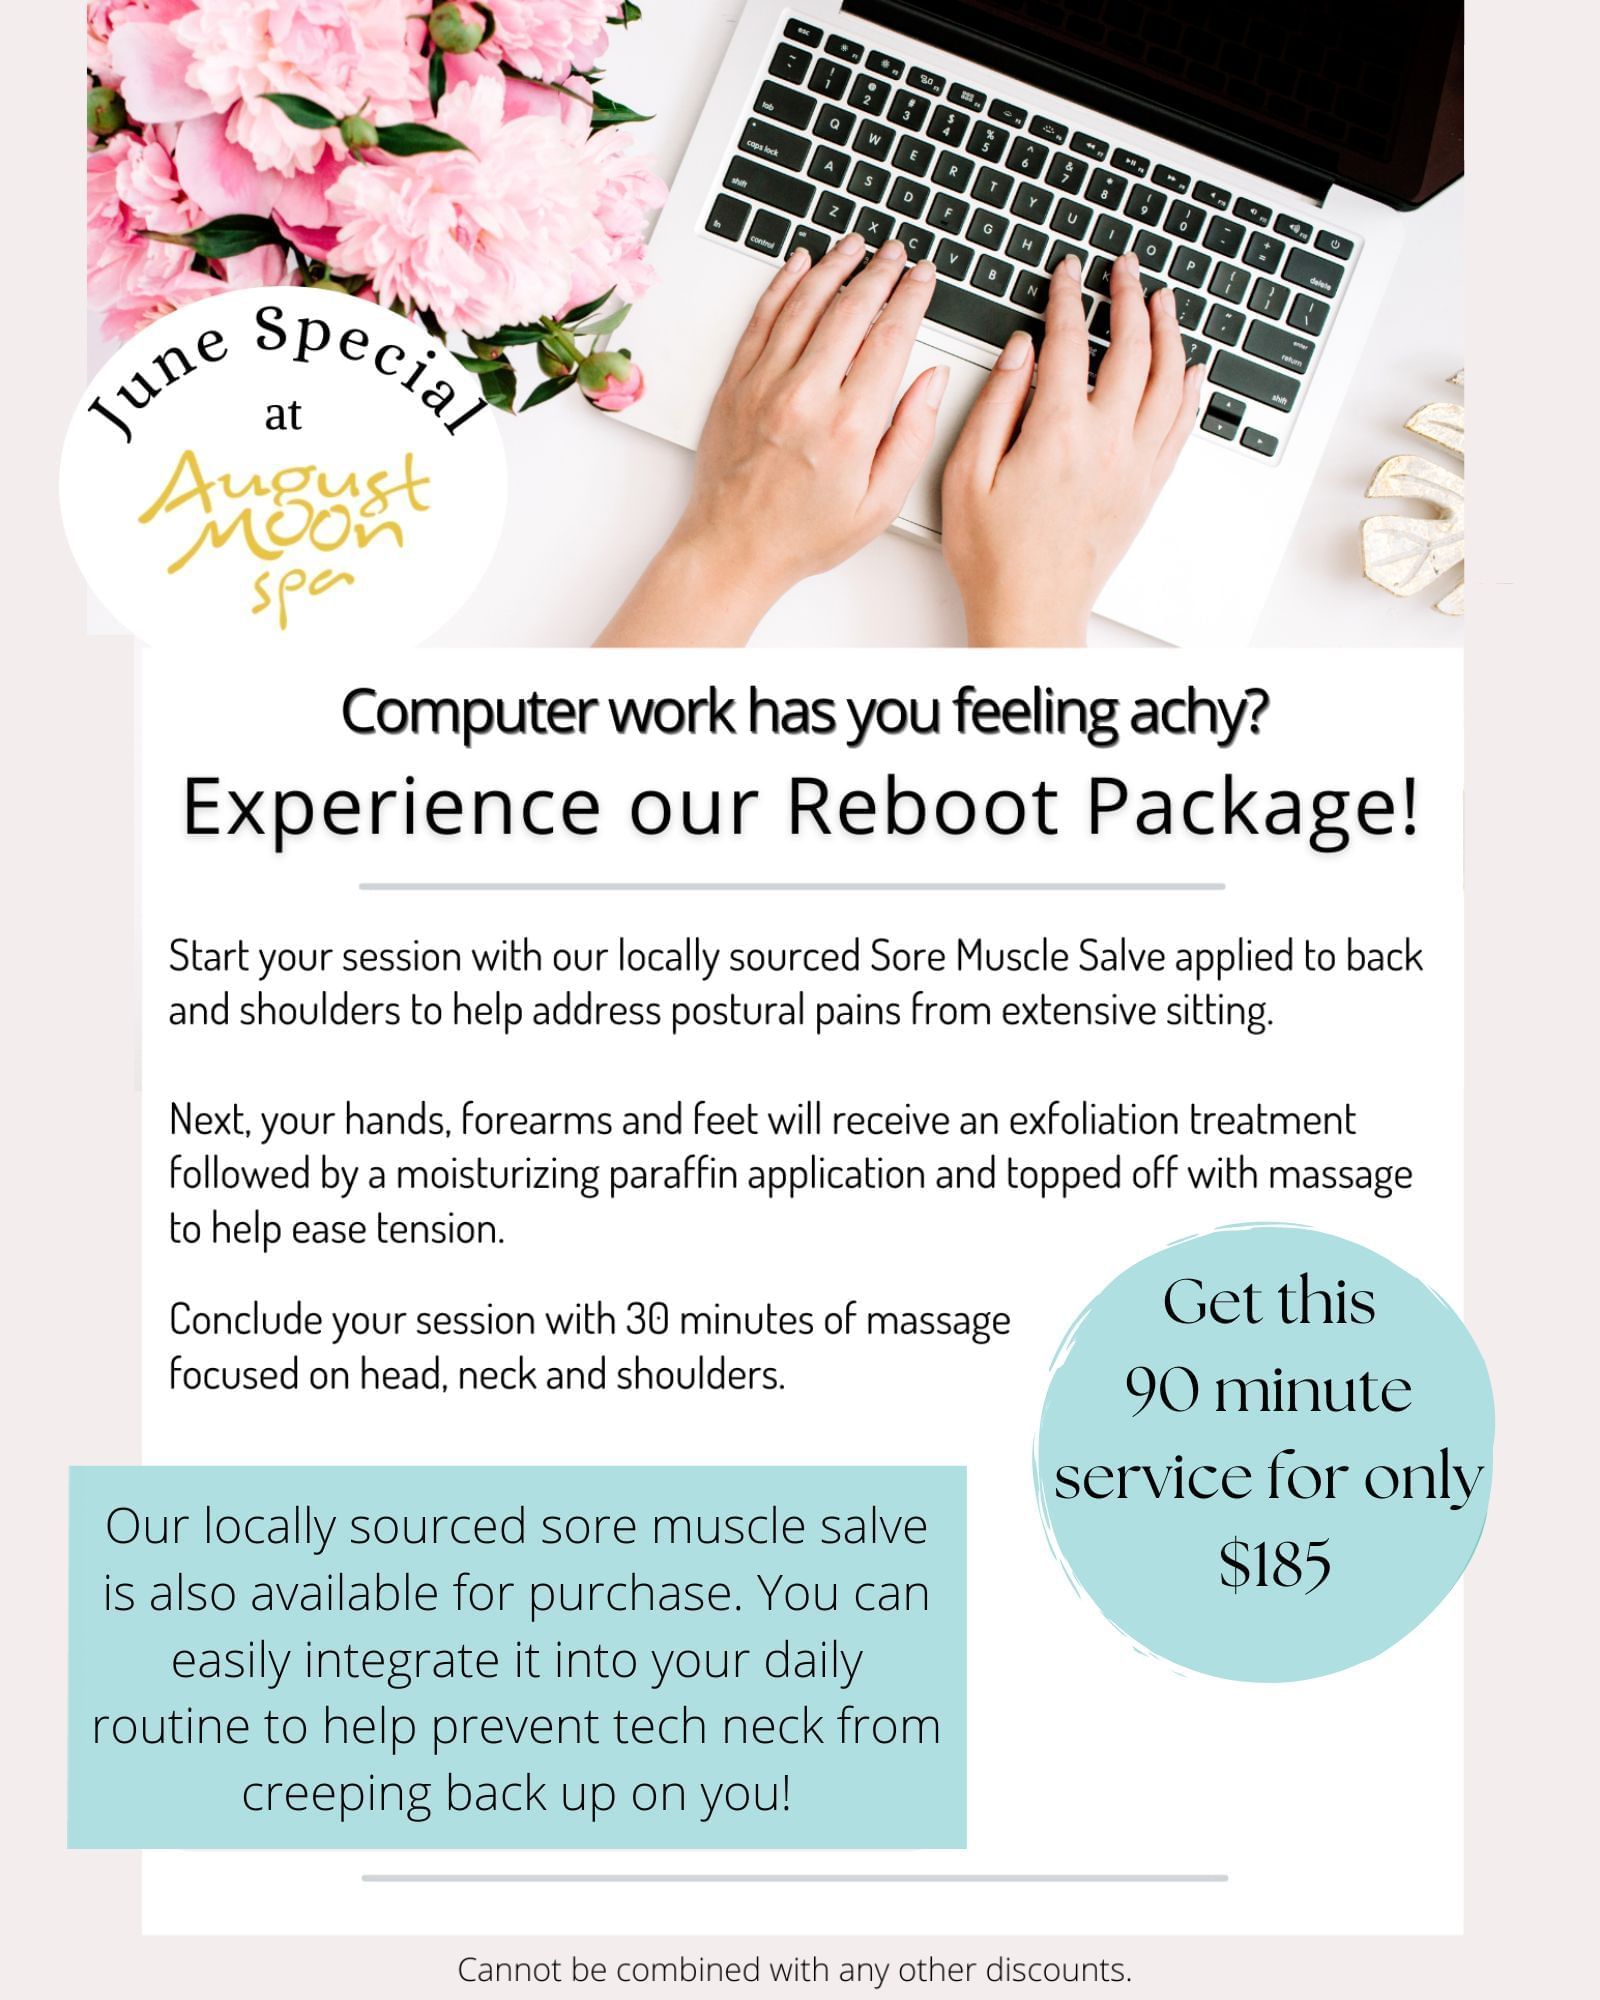 receive our reboot package. a 90 minute service designed to address tension in the neck, arms and shoulders